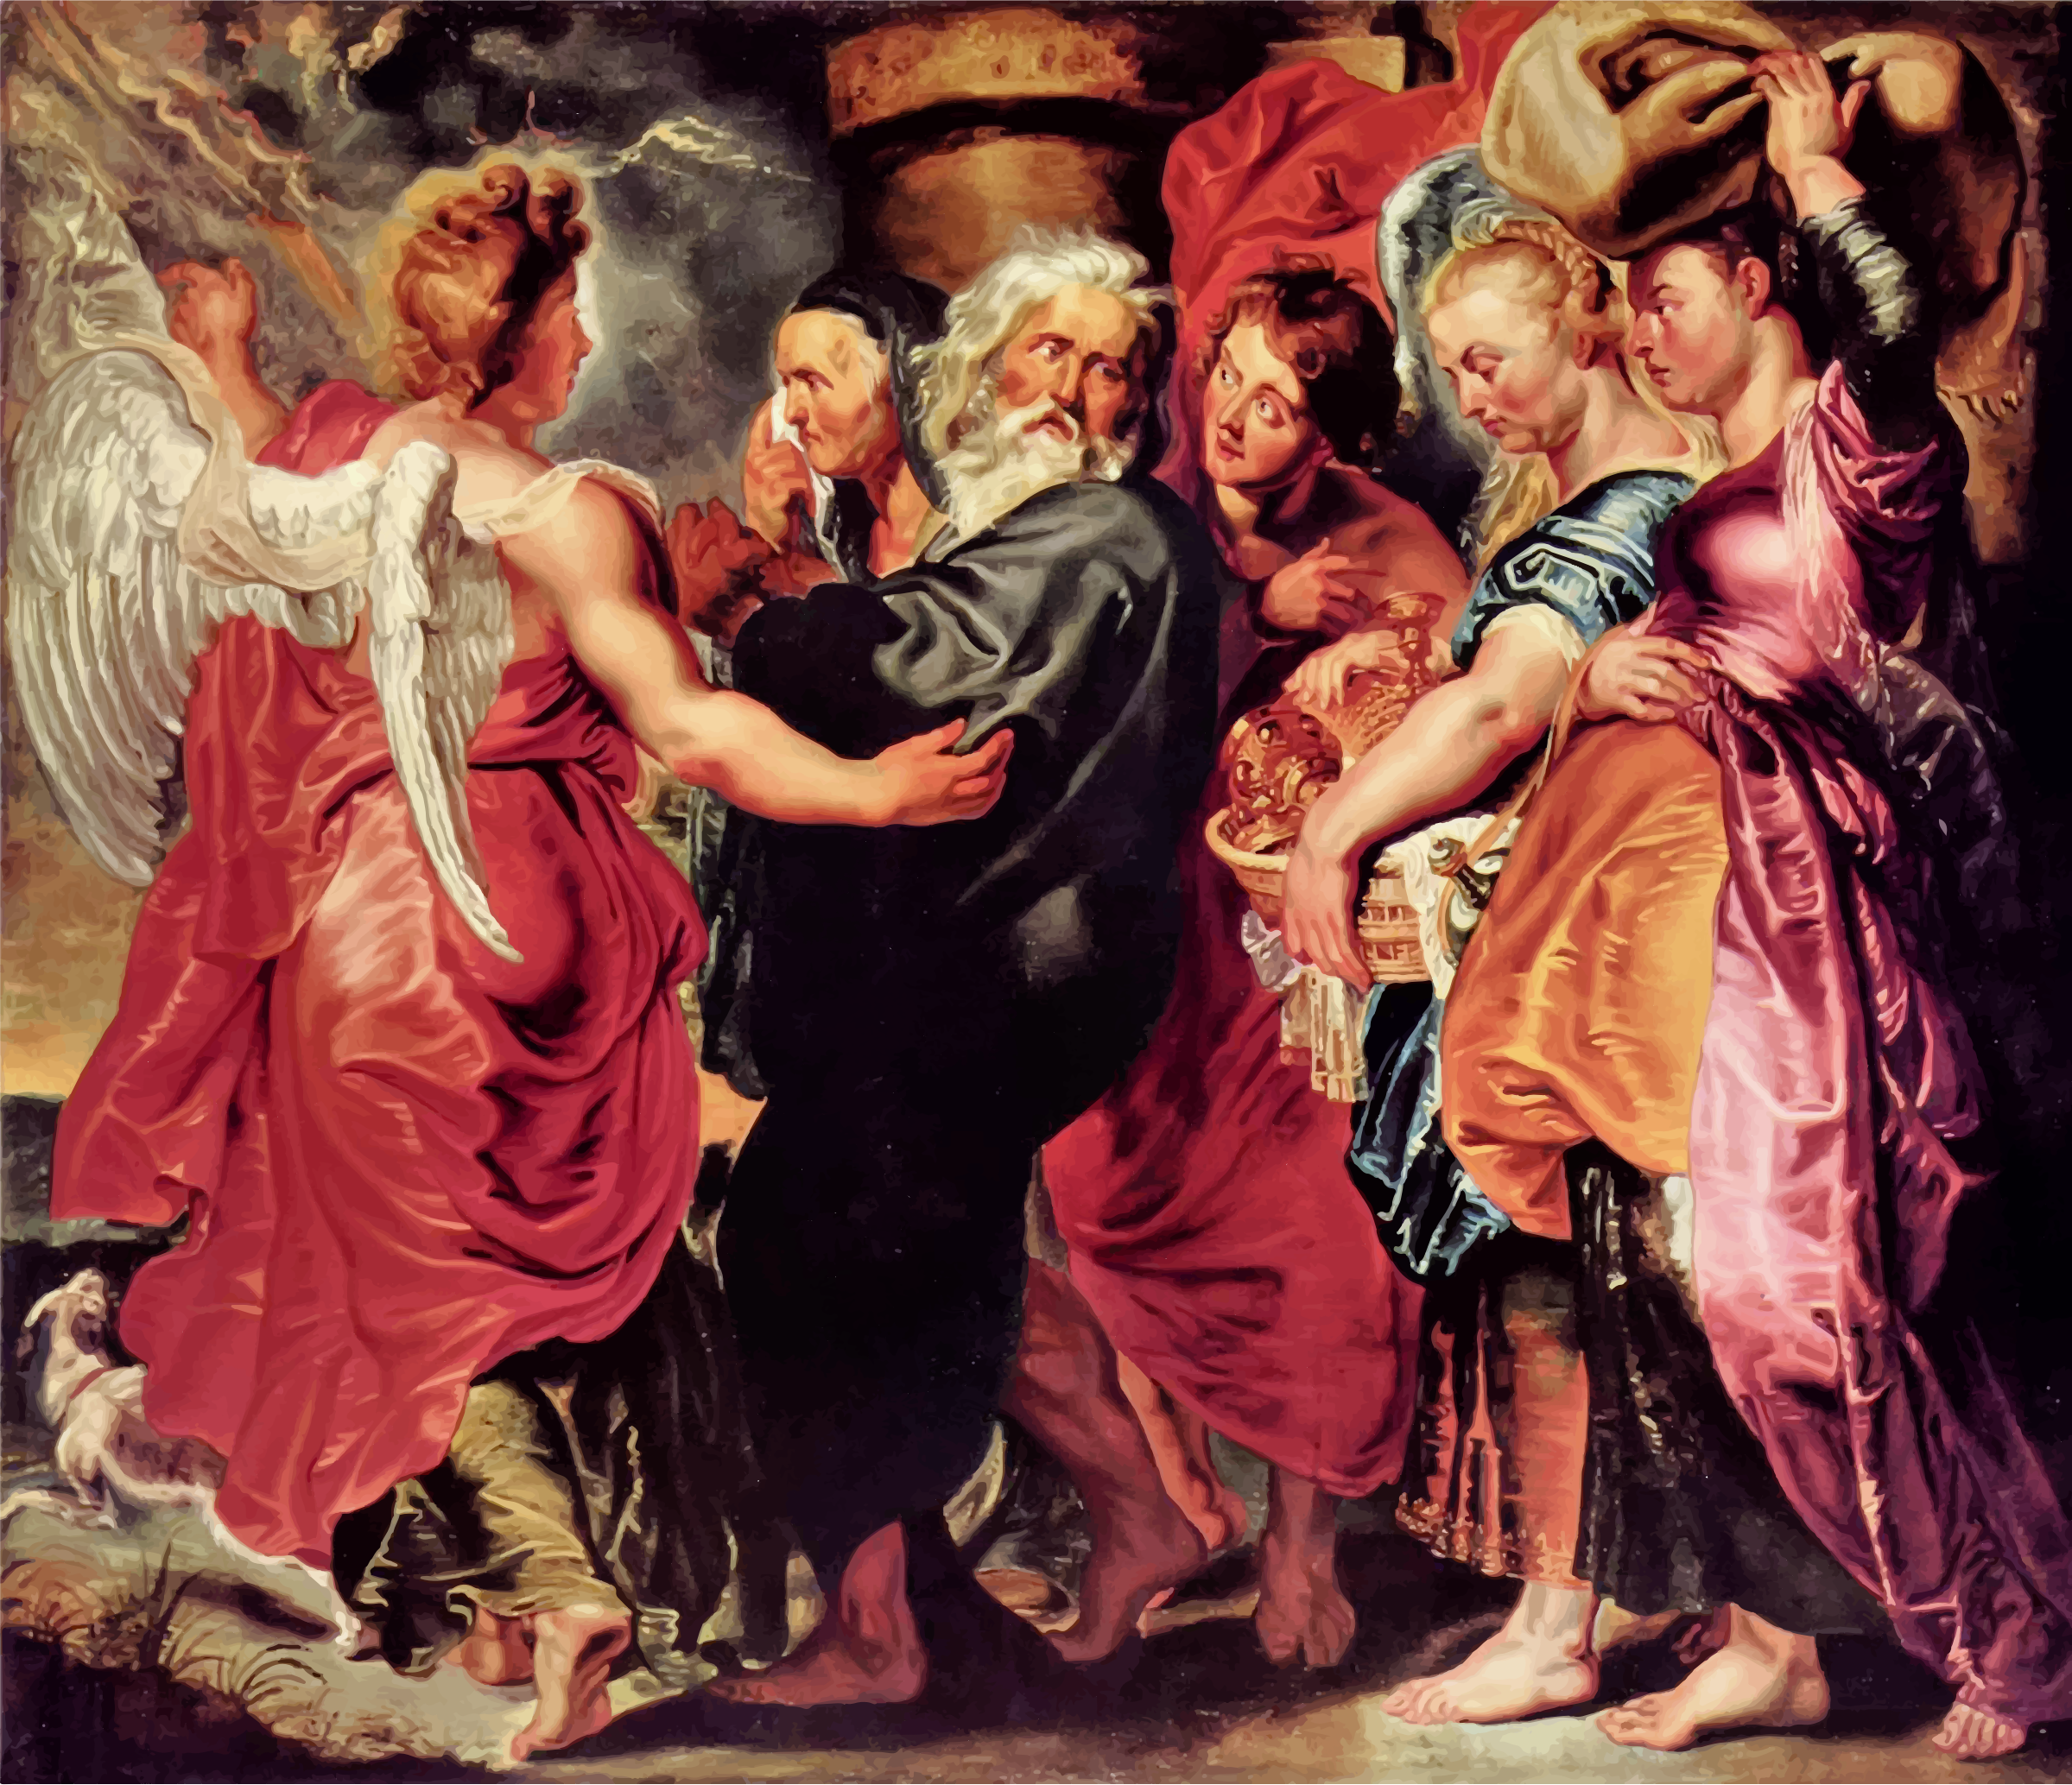 Lot Leaves Sodom with His Family By Peter Paul Rubens Clip arts